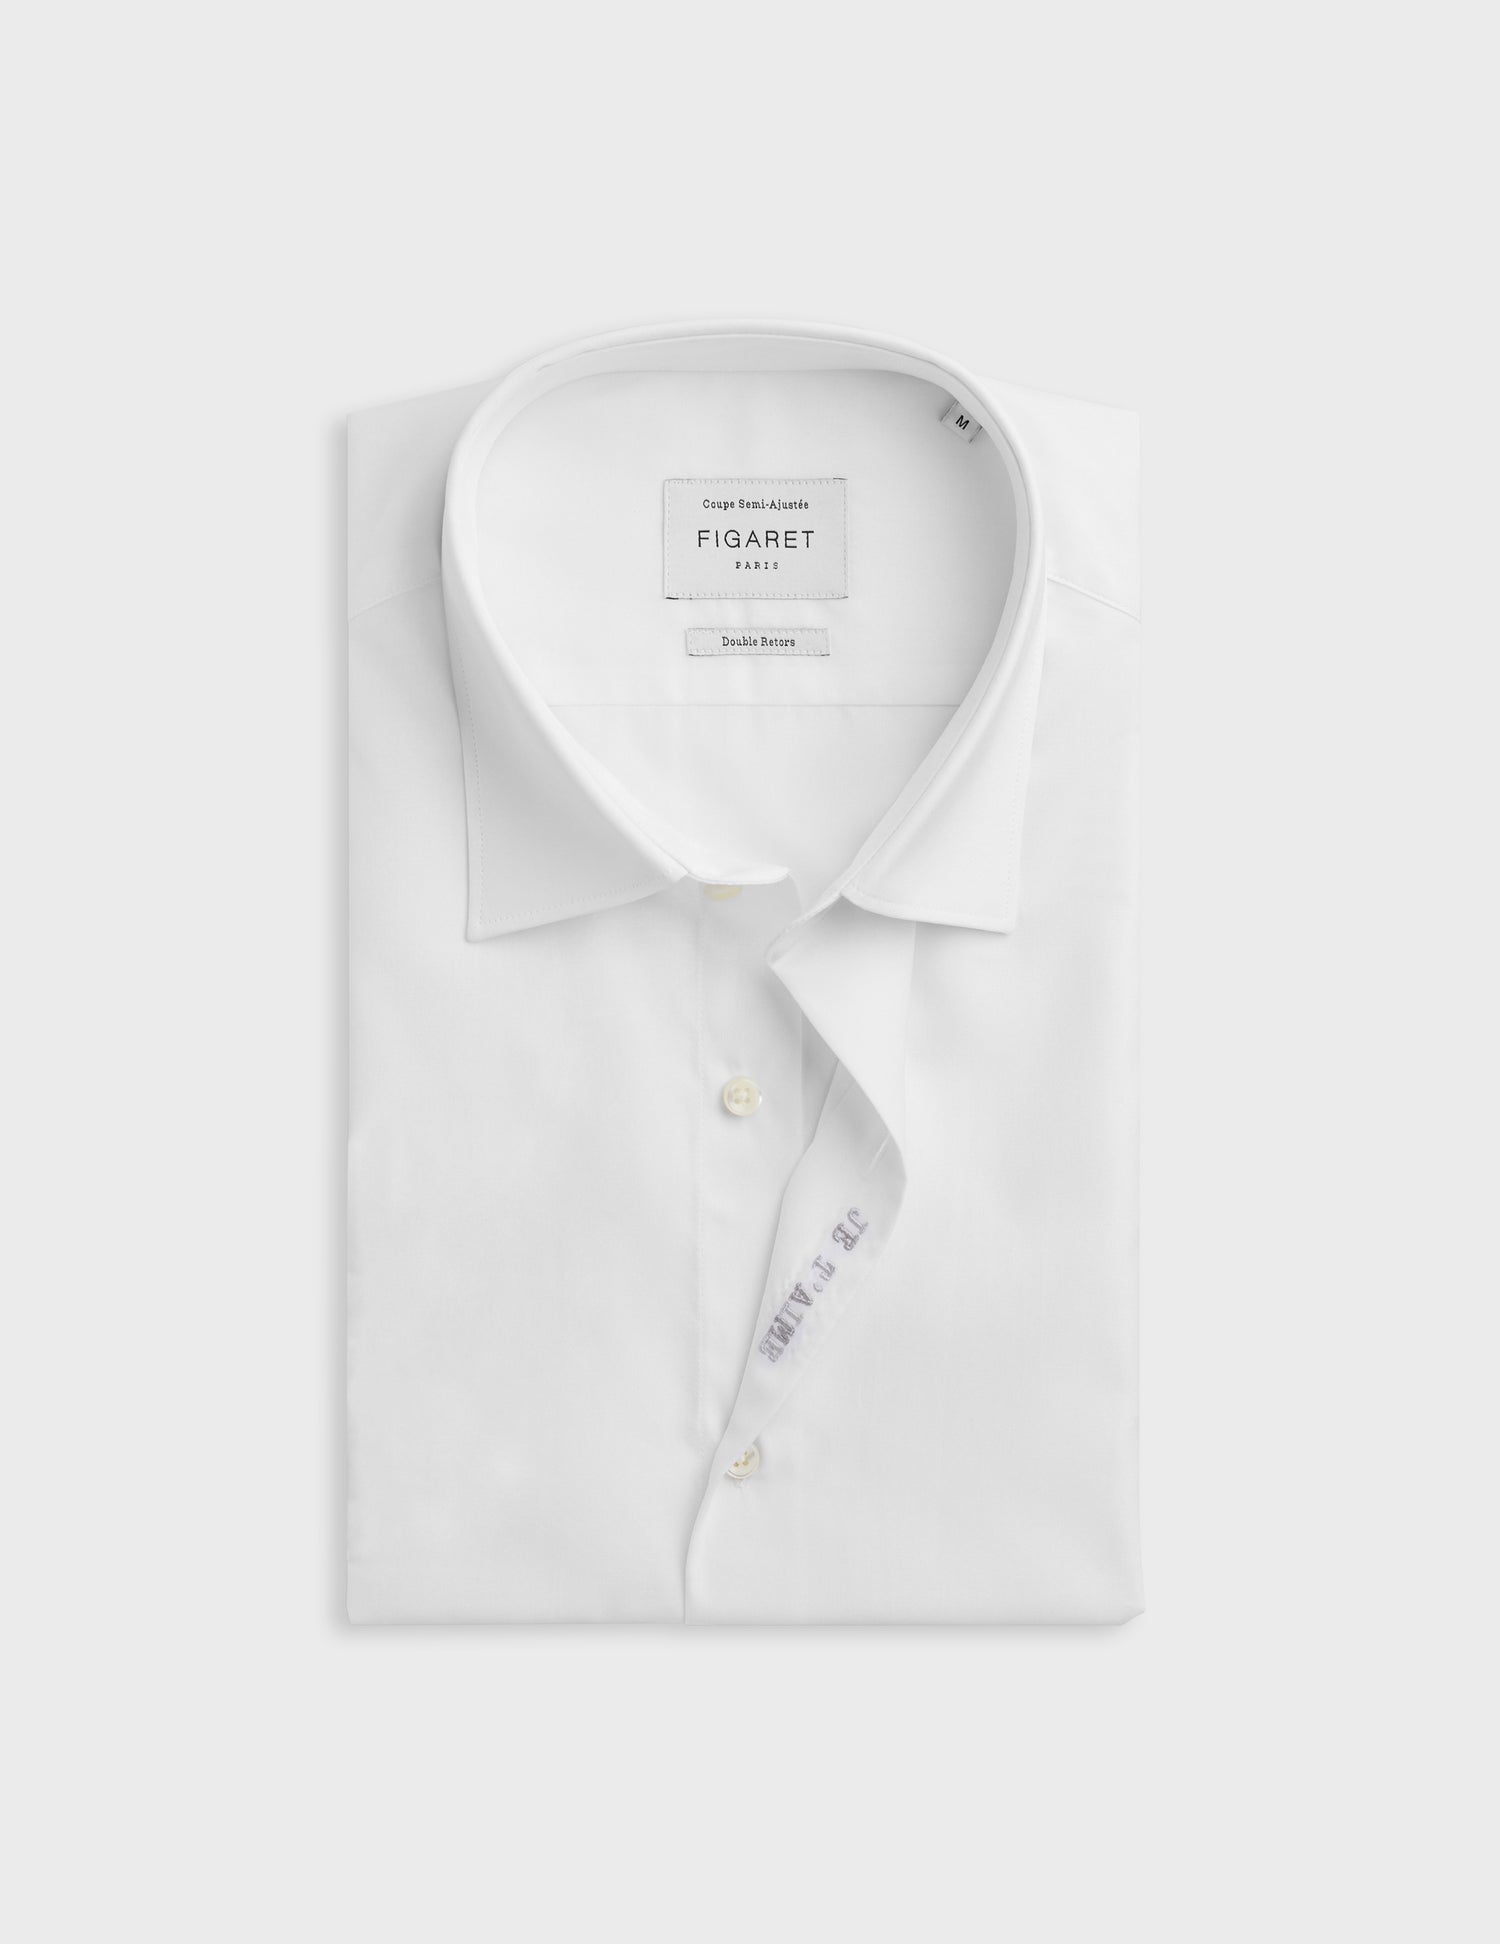 White "Je t'aime" shirt with grey embroidery - Poplin - Figaret Collar#9